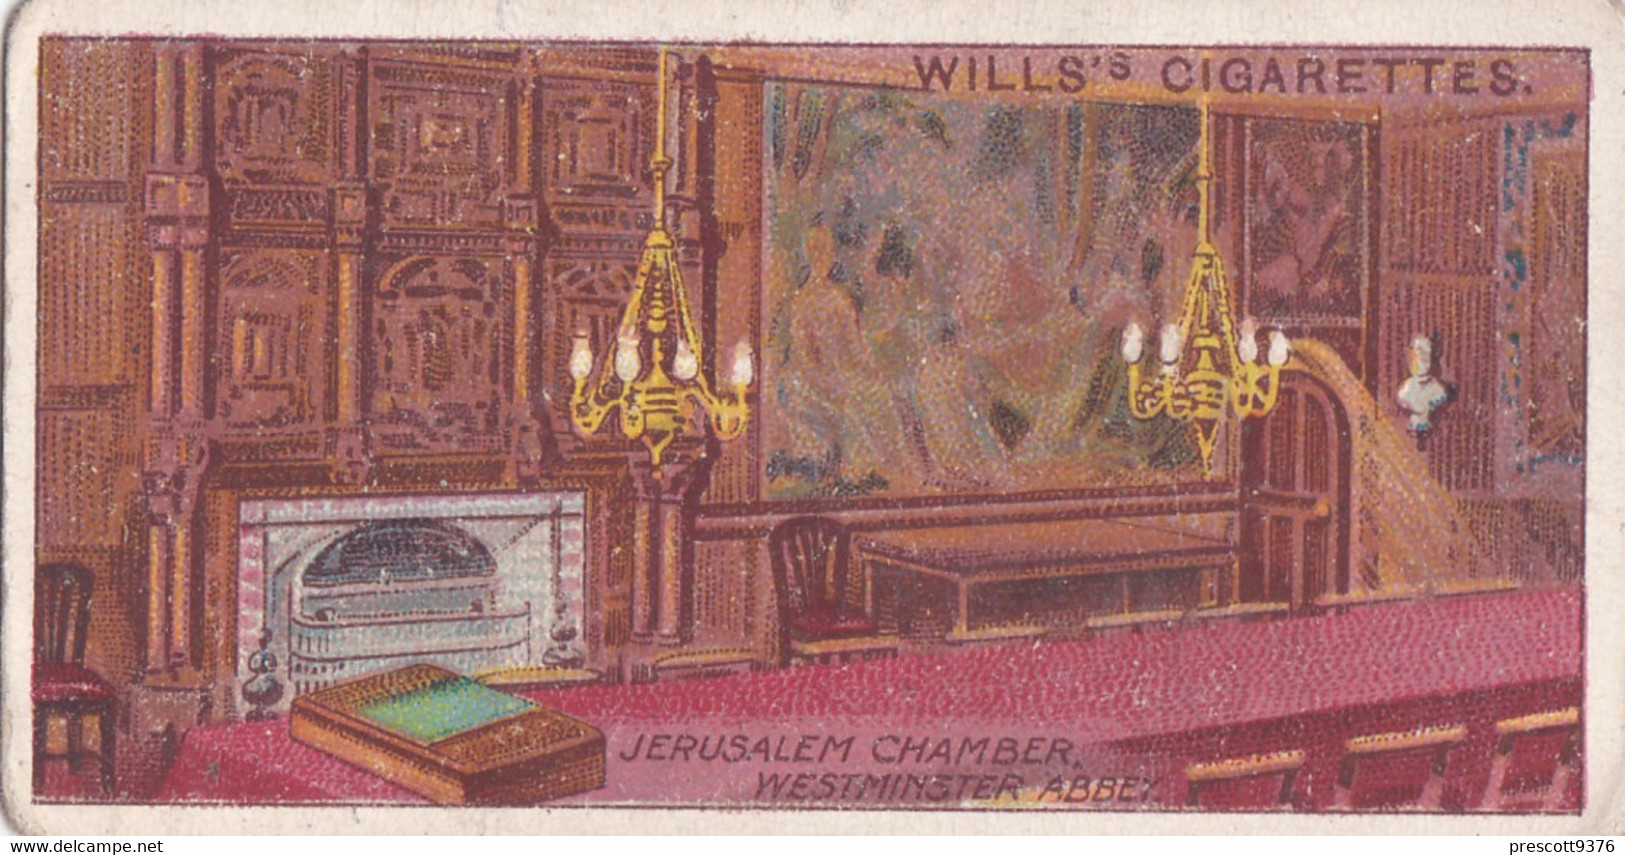 39 Jerusalem Chamber, Westminster Abbey - The Coronation Series 1911 -  Wills Cigarette Card - Original Antique - Wills